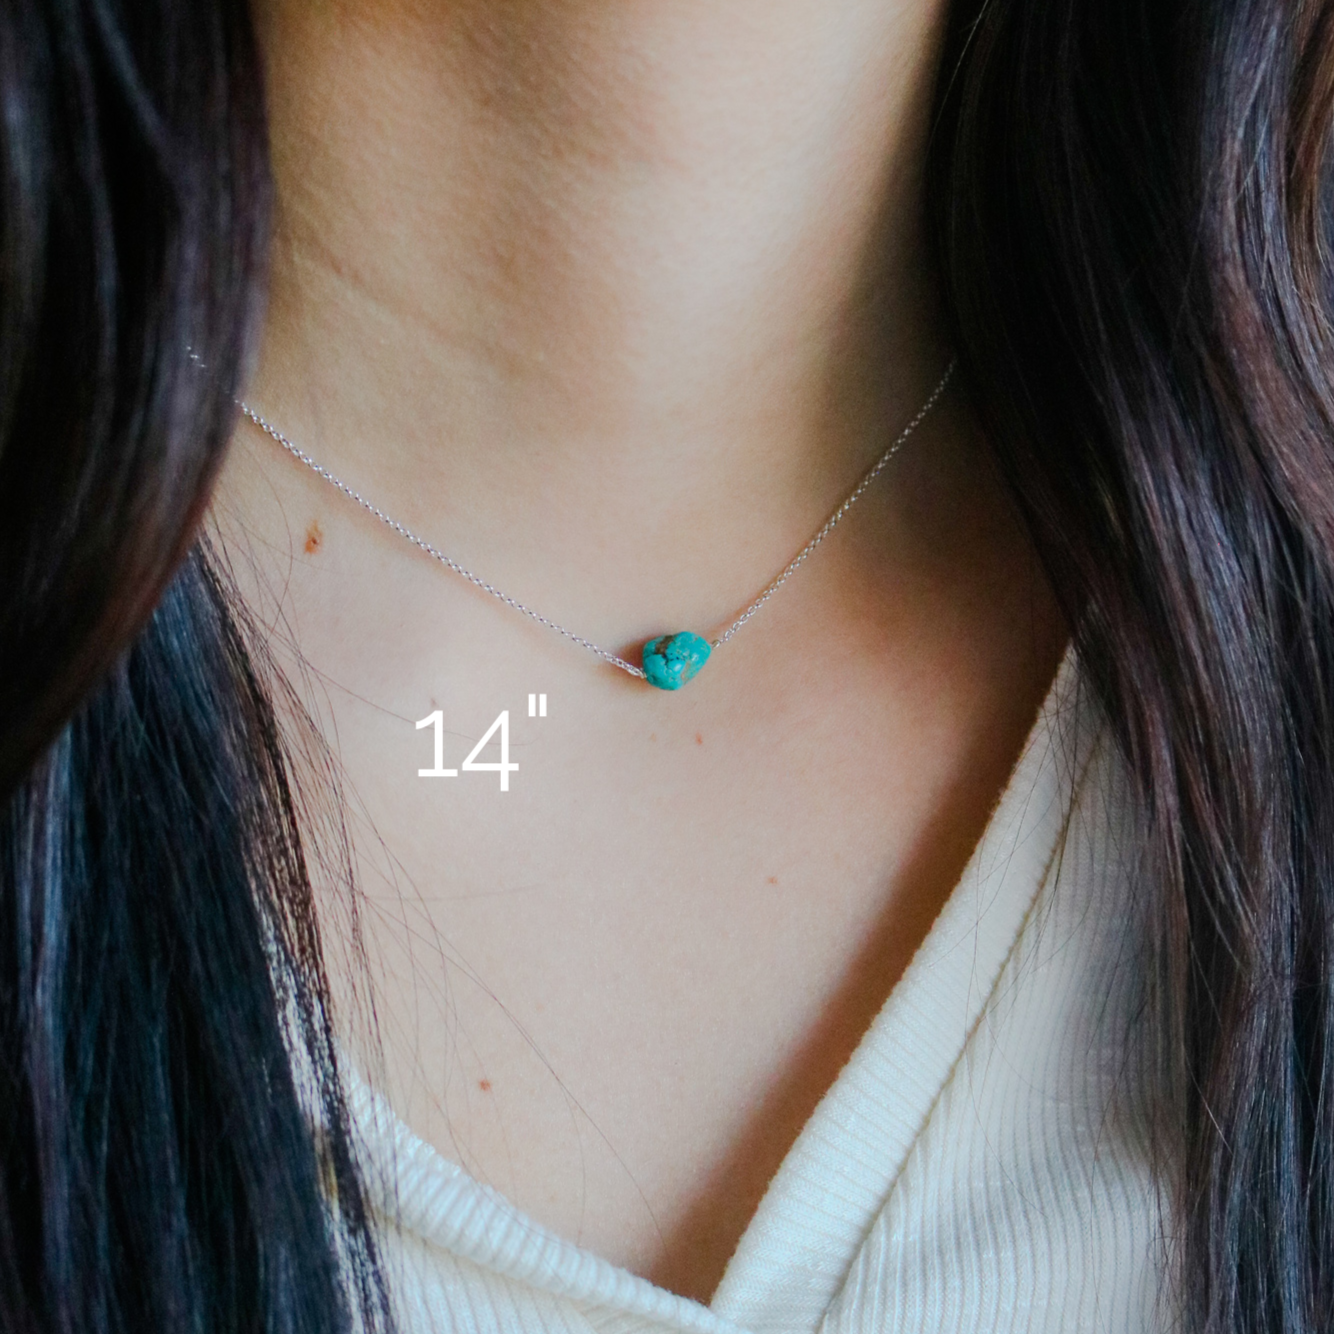 Taos // Turquoise Nugget Necklace